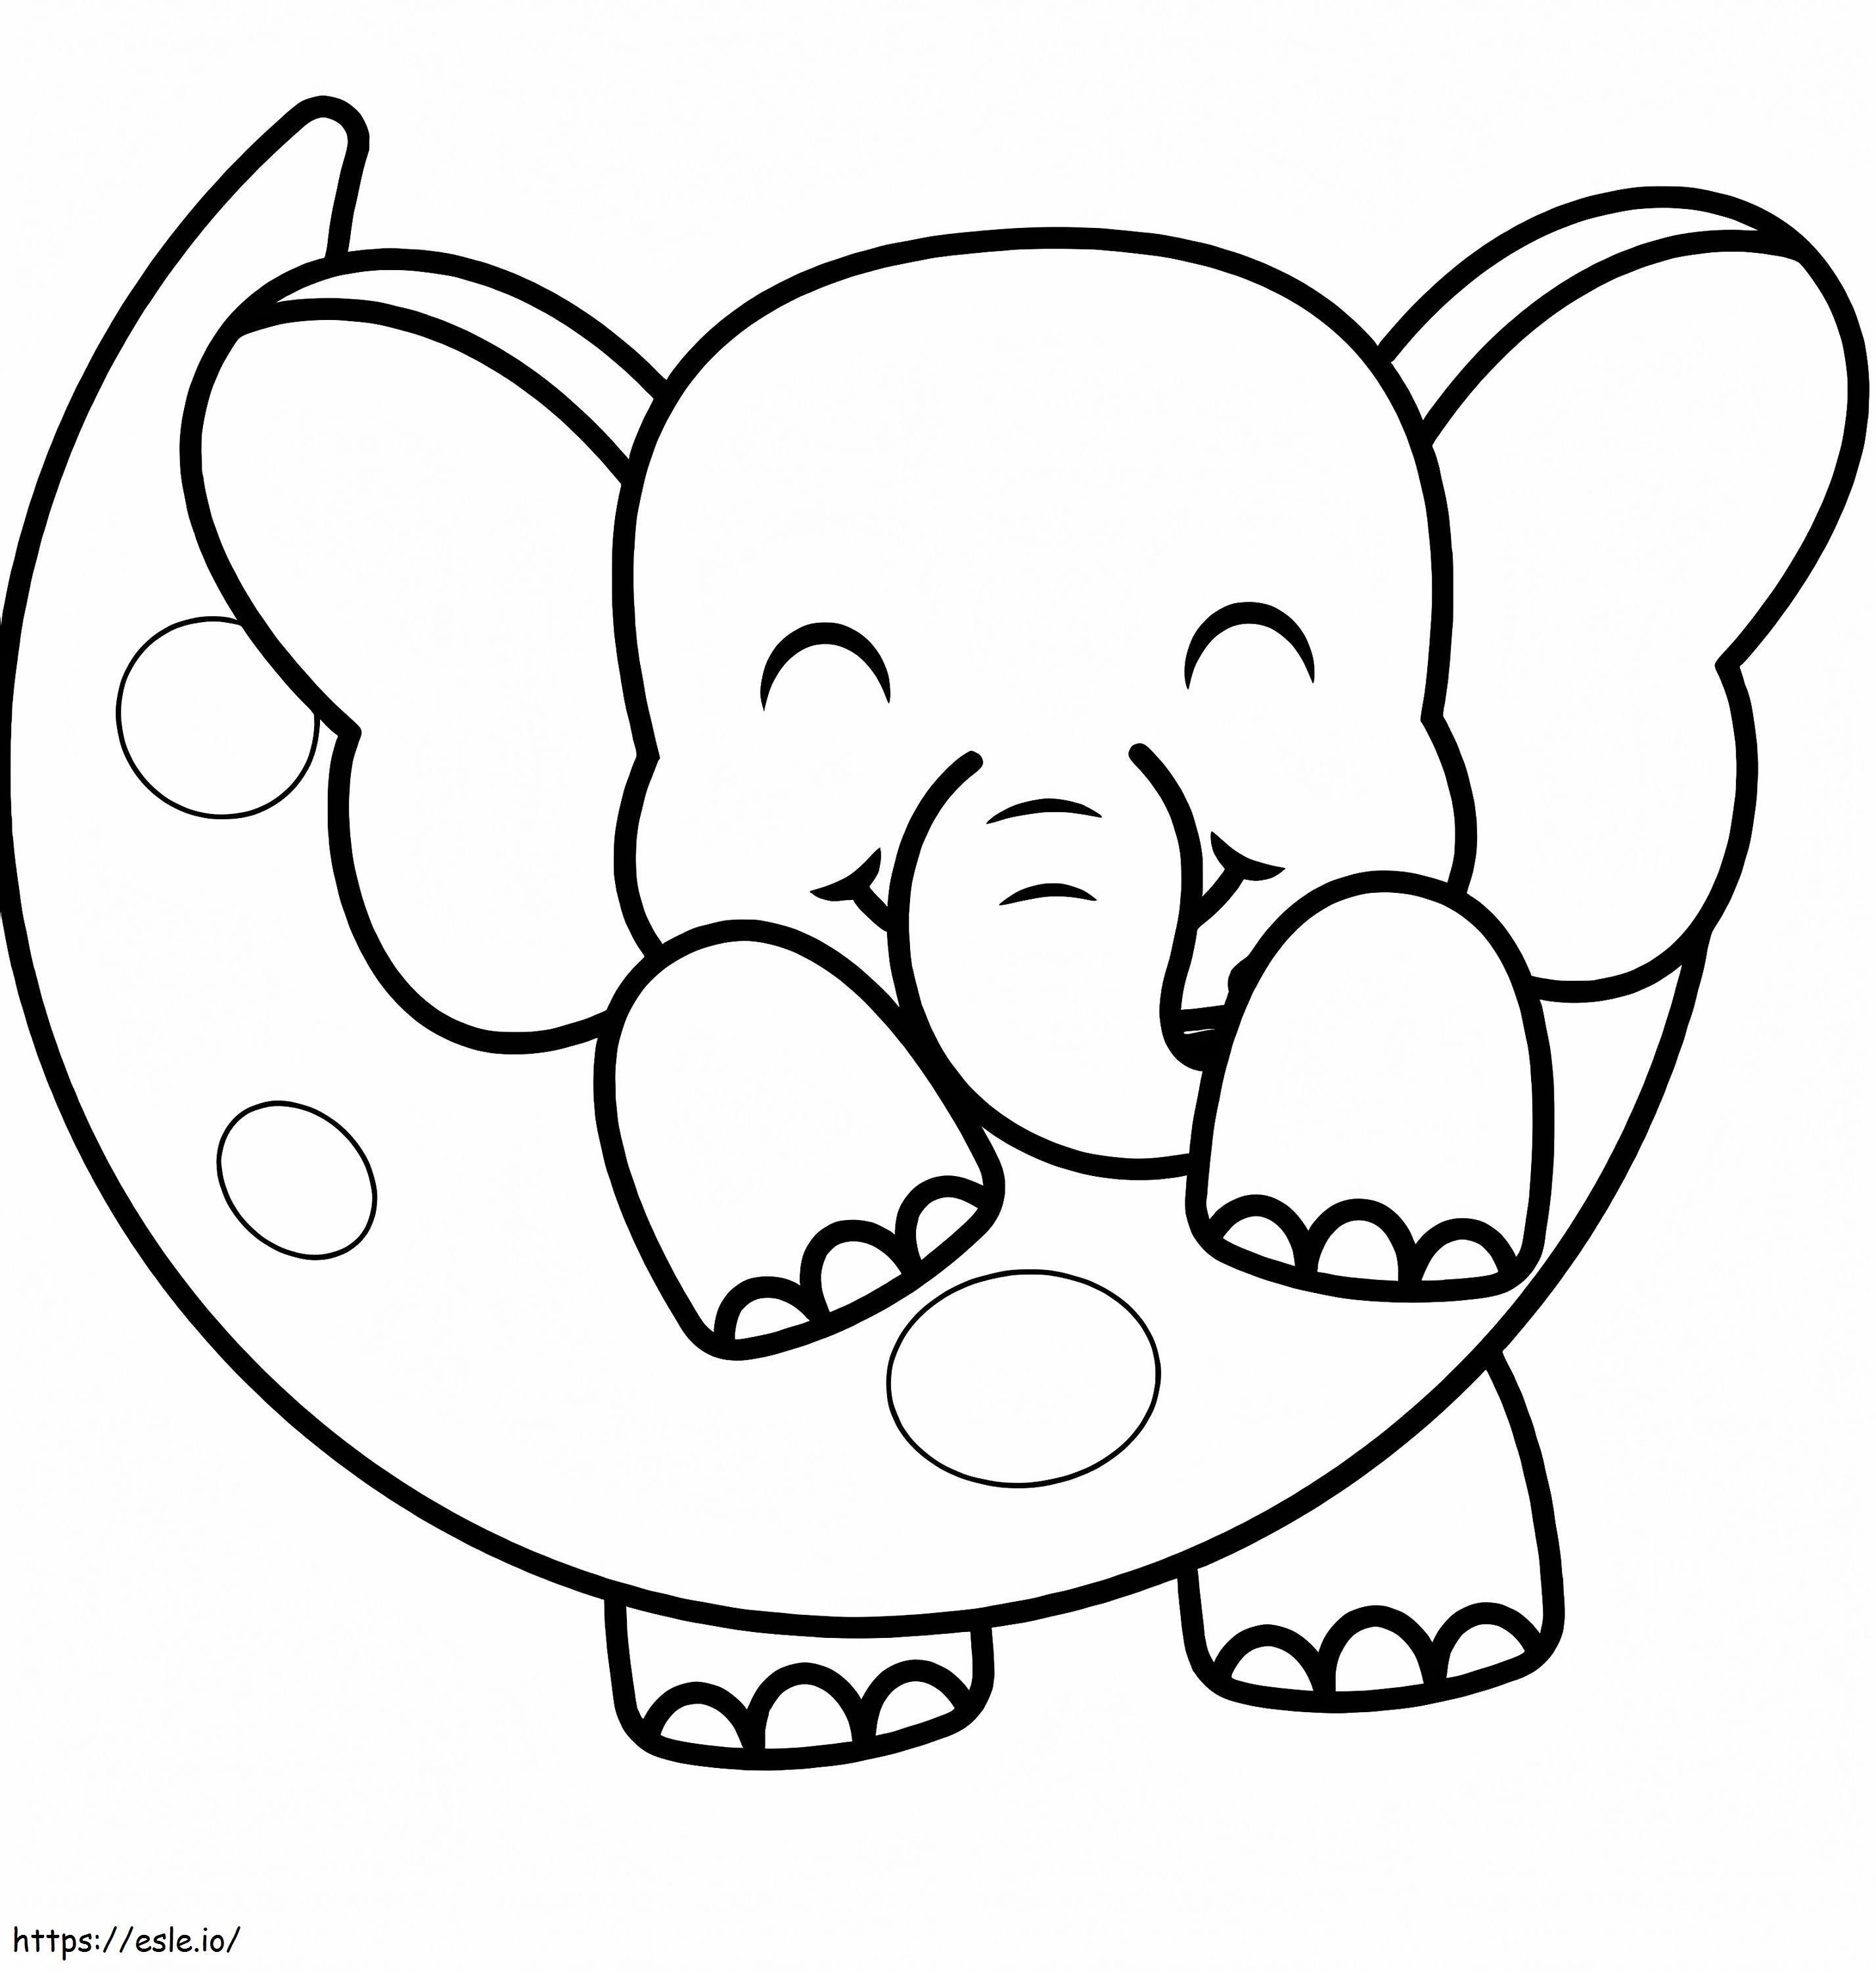 Elephant With Moon coloring page